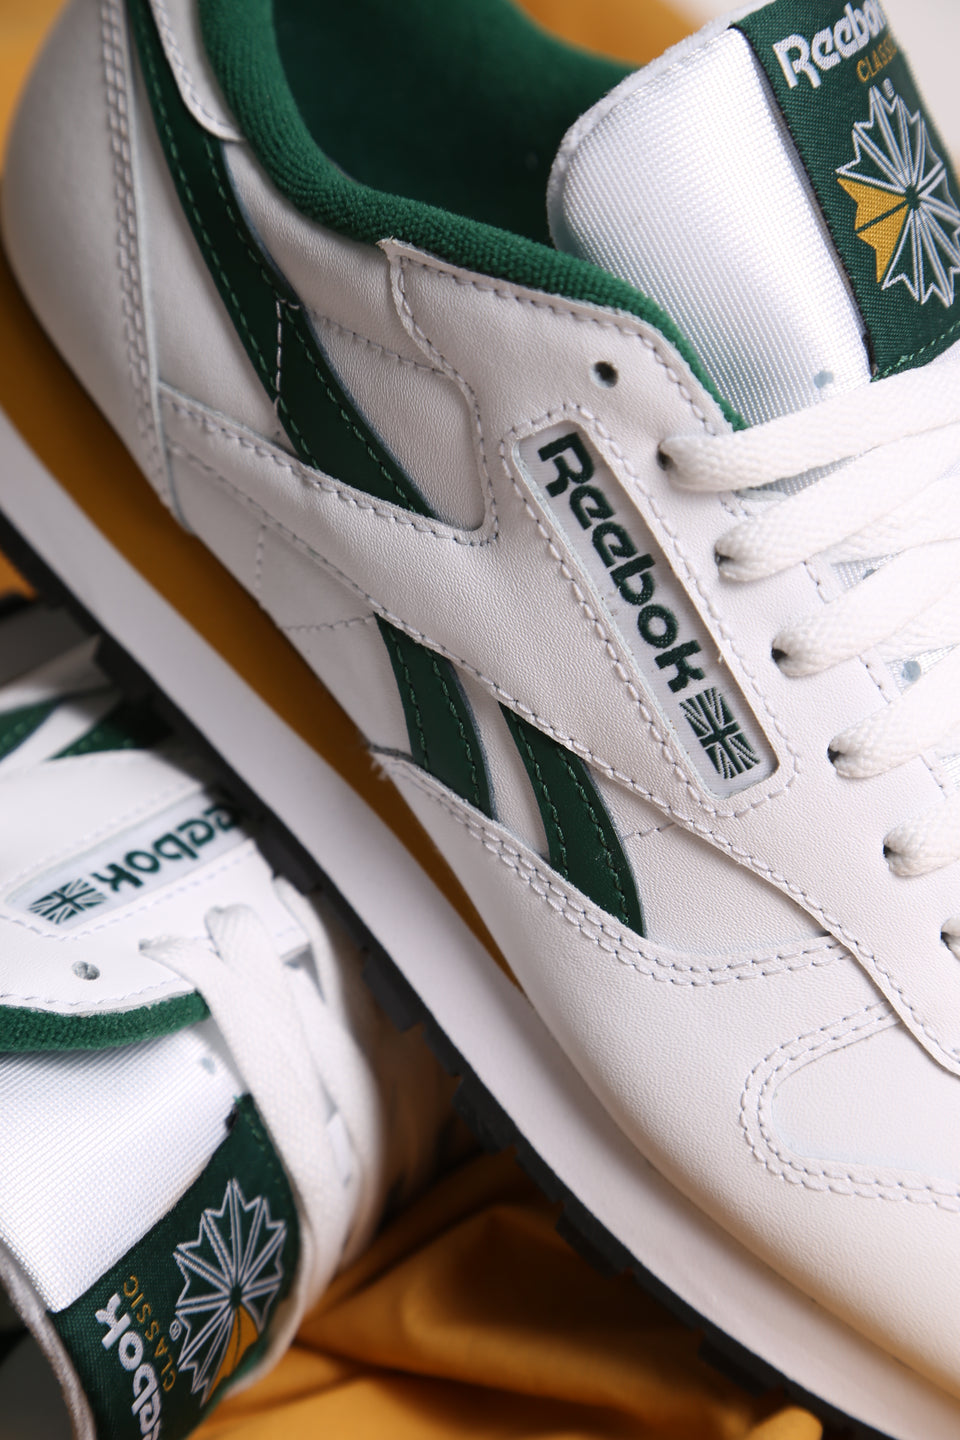 Reebok Classic Leather Homme - White Dark Green Gold